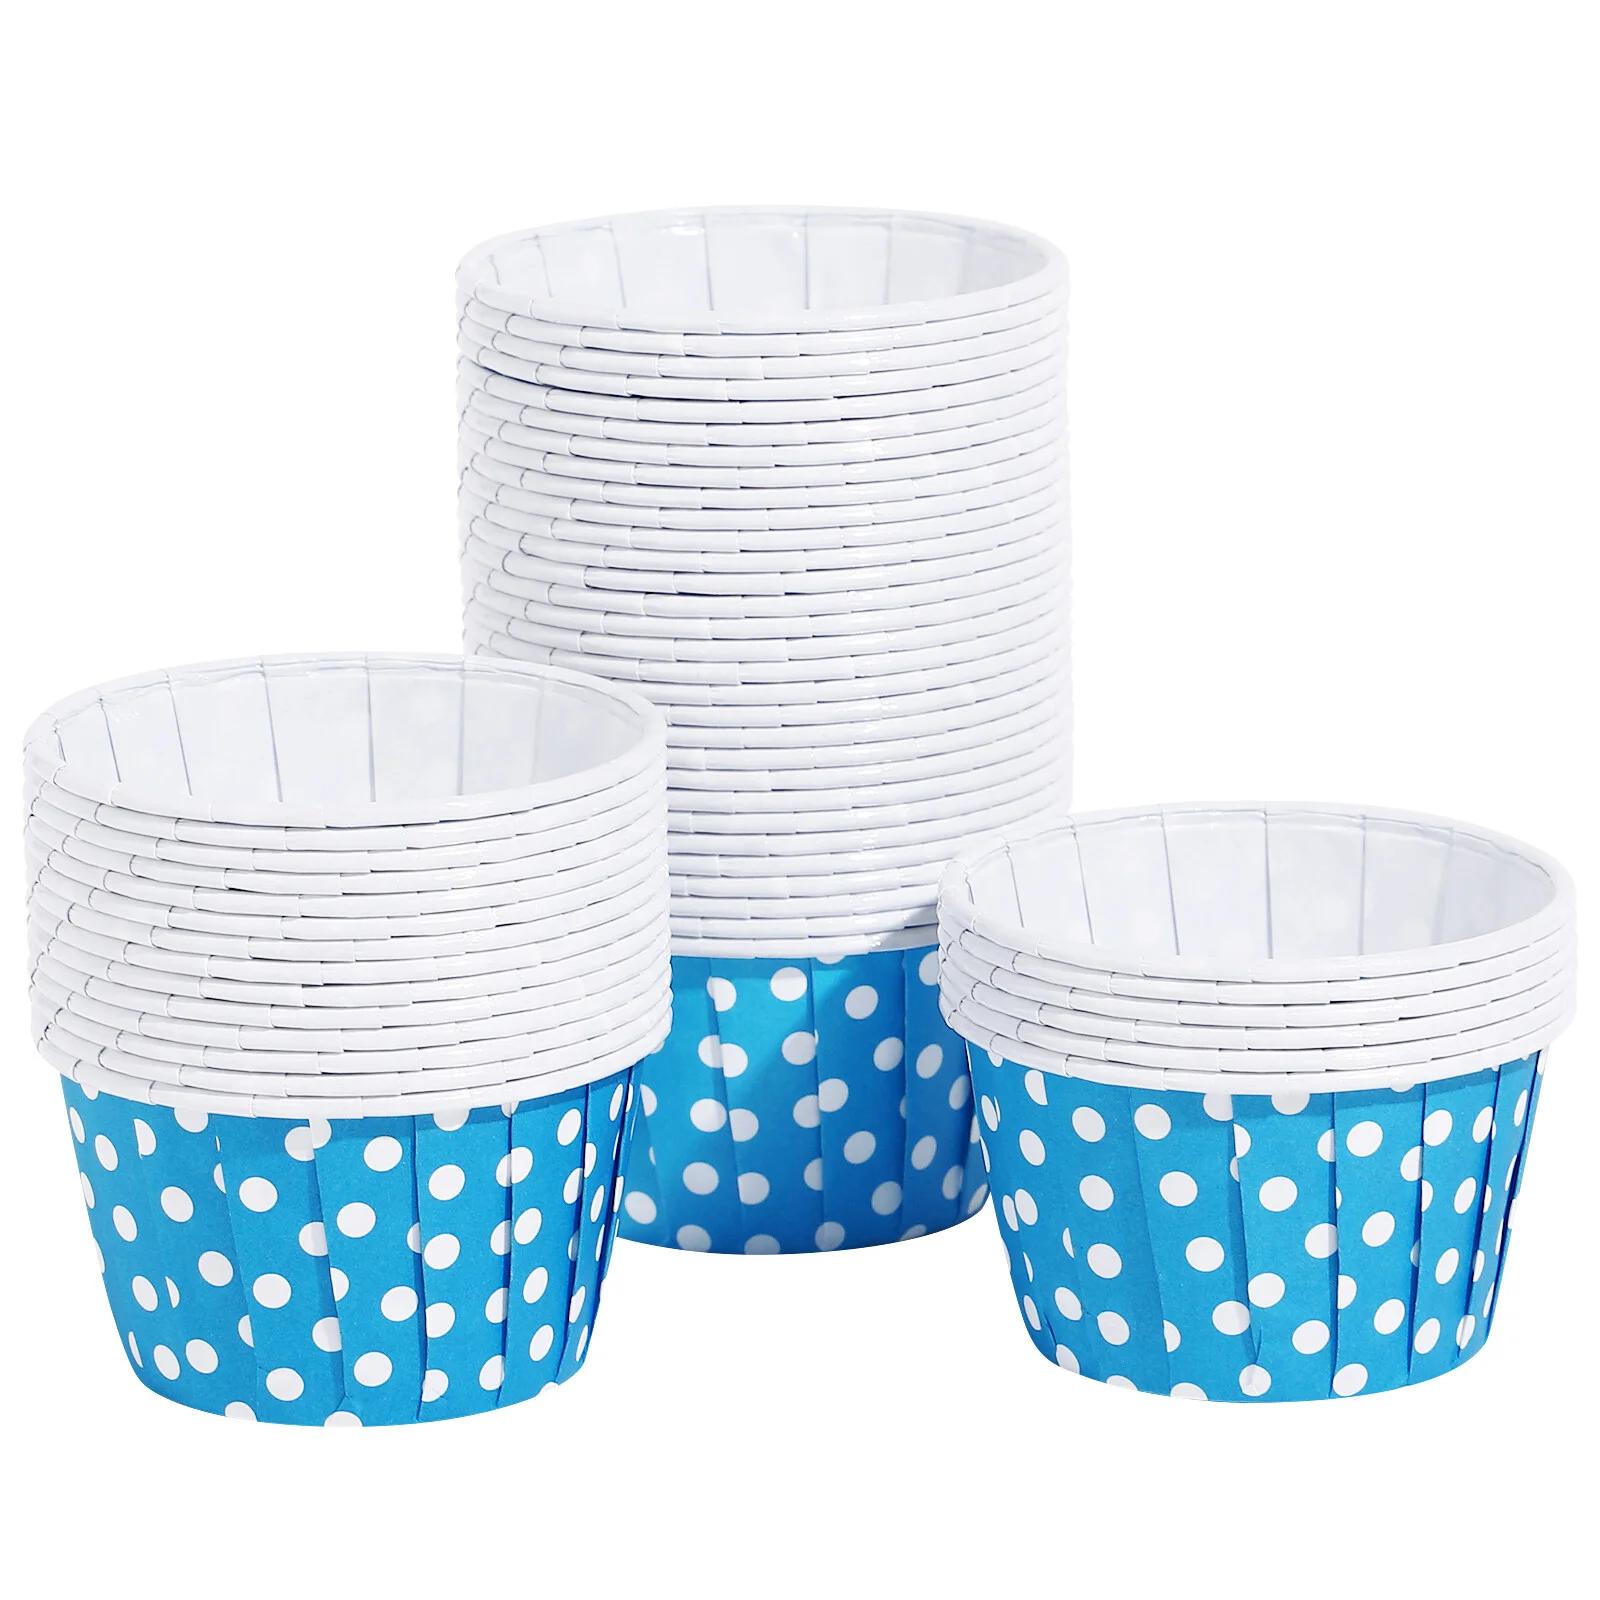 

100pcs Paper Cupcake Liners Heat Resistant Cupcake Wrappers Muffin Cups for Baking (Random Color)